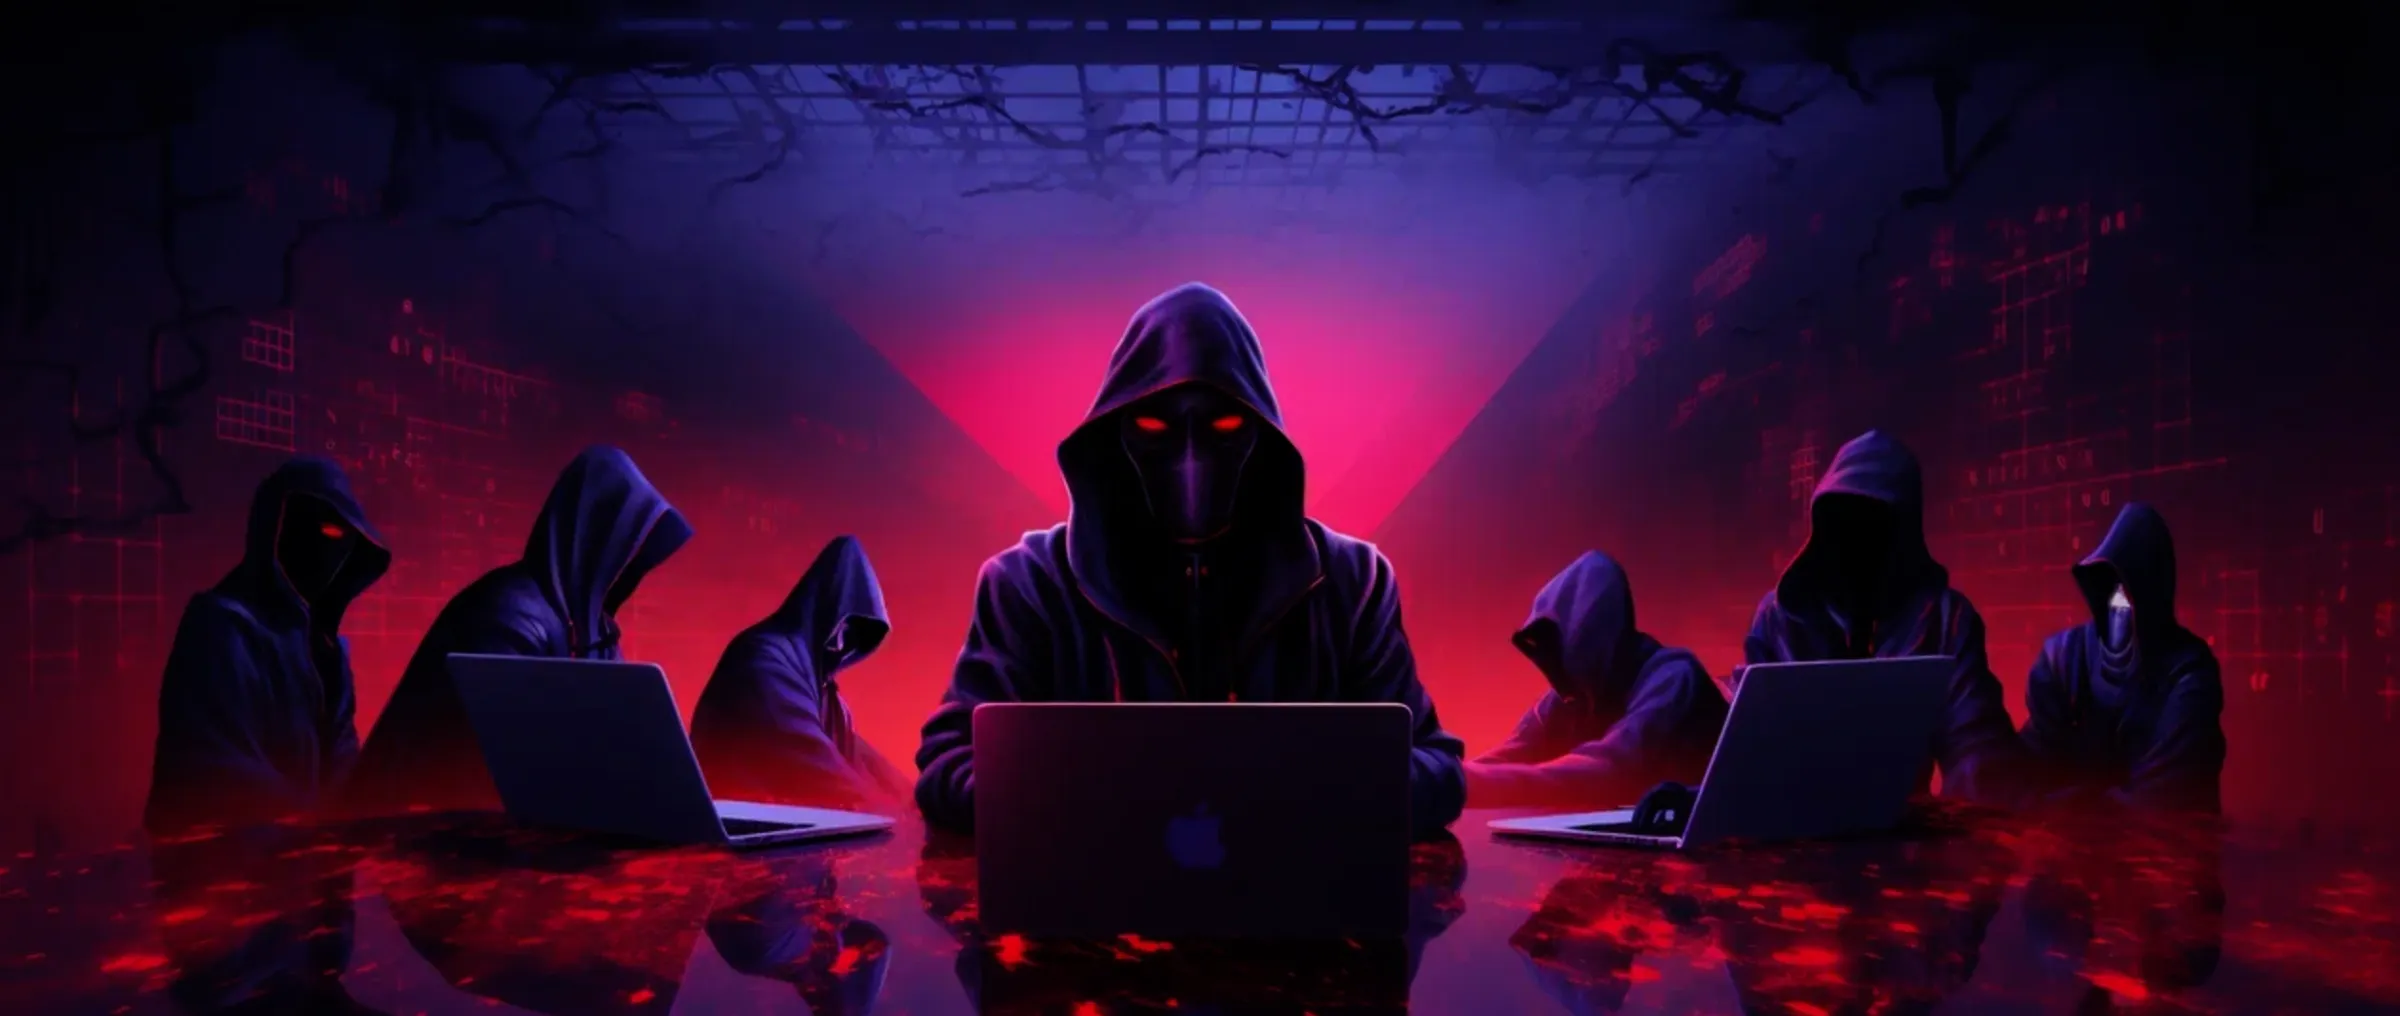 In 2023 $675 million dollars that were stolen by hackers were recovered